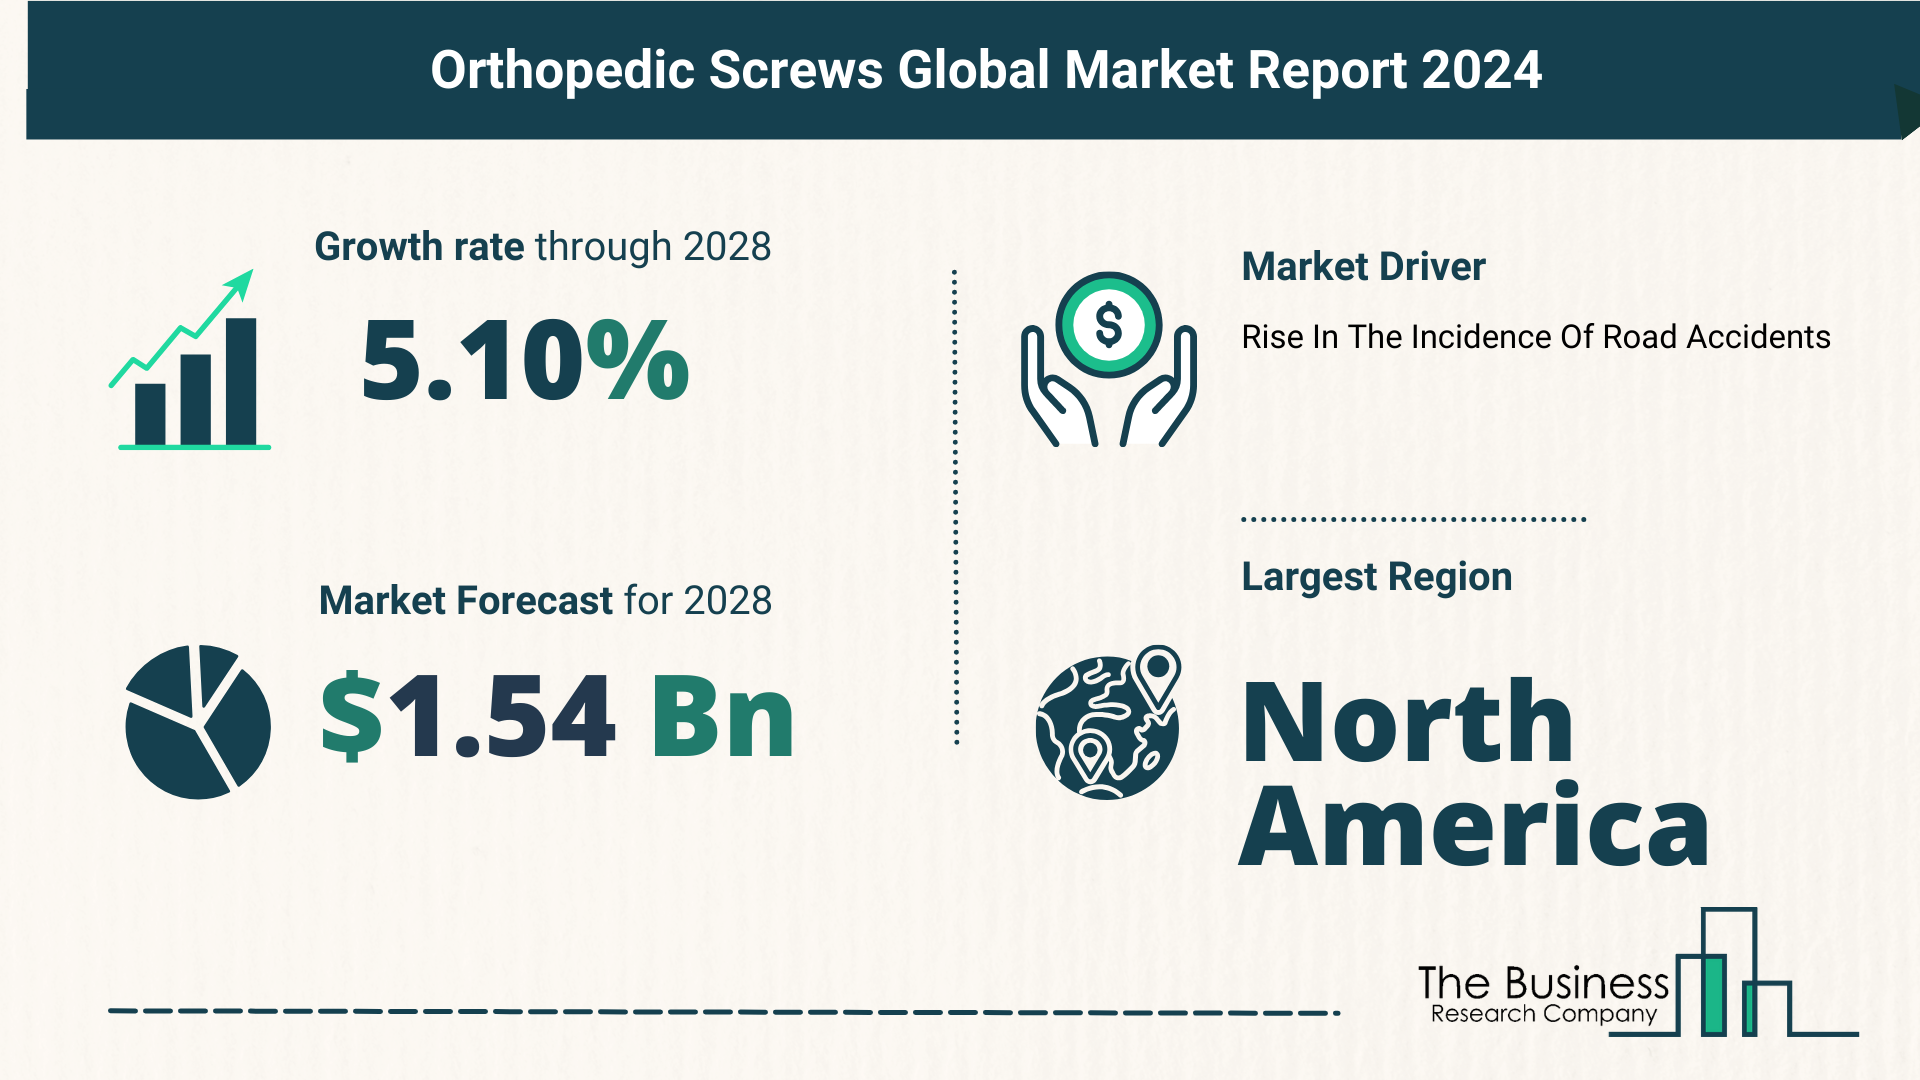 Top 5 Insights From The Orthopedic Screws Market Report 2024